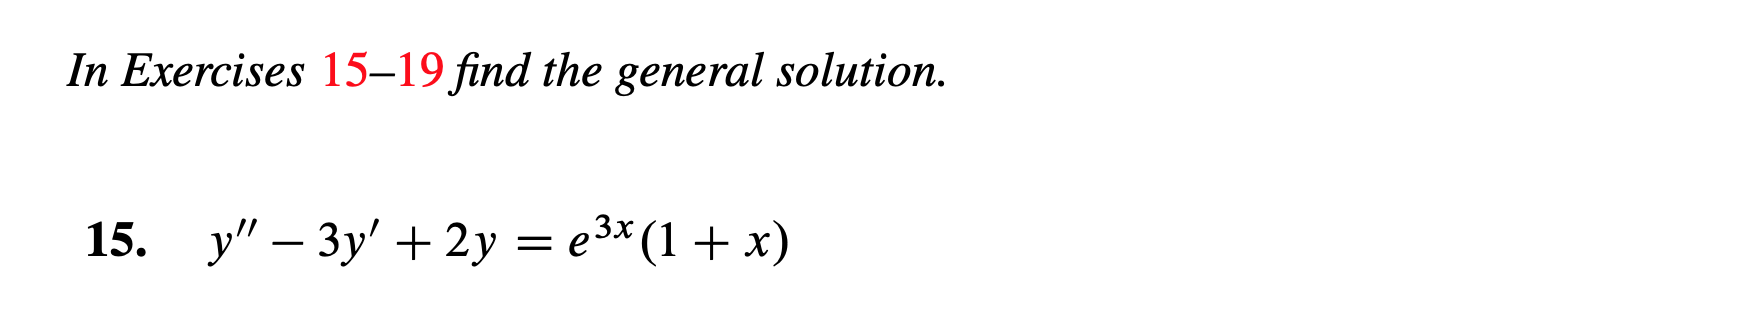 In Exercises 15-19 find the general solution.
15. y3y +2y e3x(1 + x)
